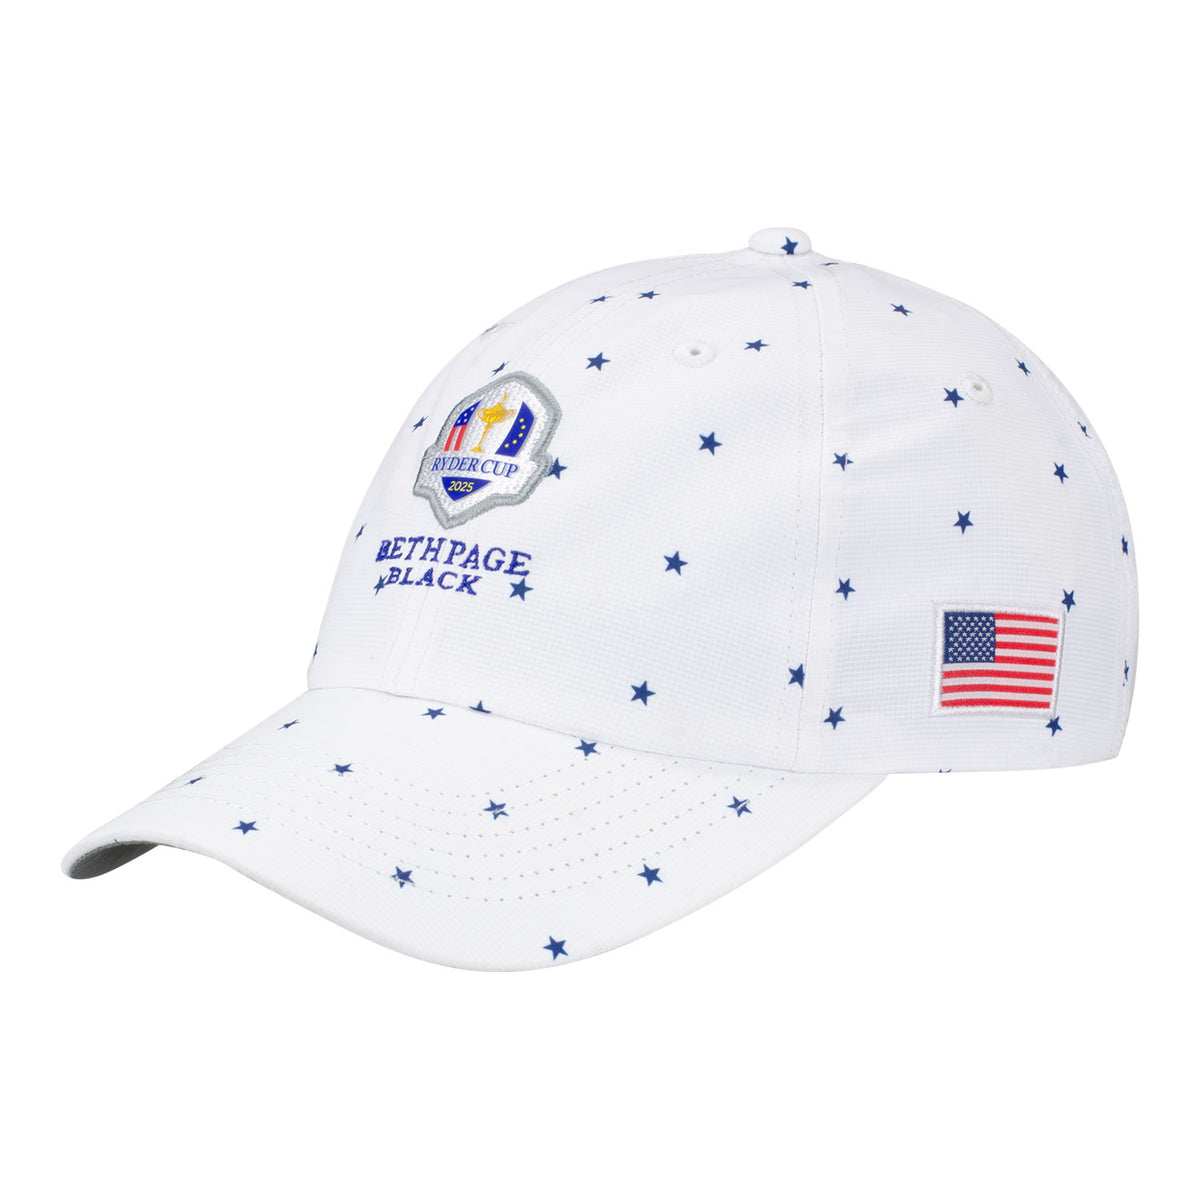 Imperial 2025 Ryder Cup Original Performance Hat in White Star Pattern - Angled Front Left View